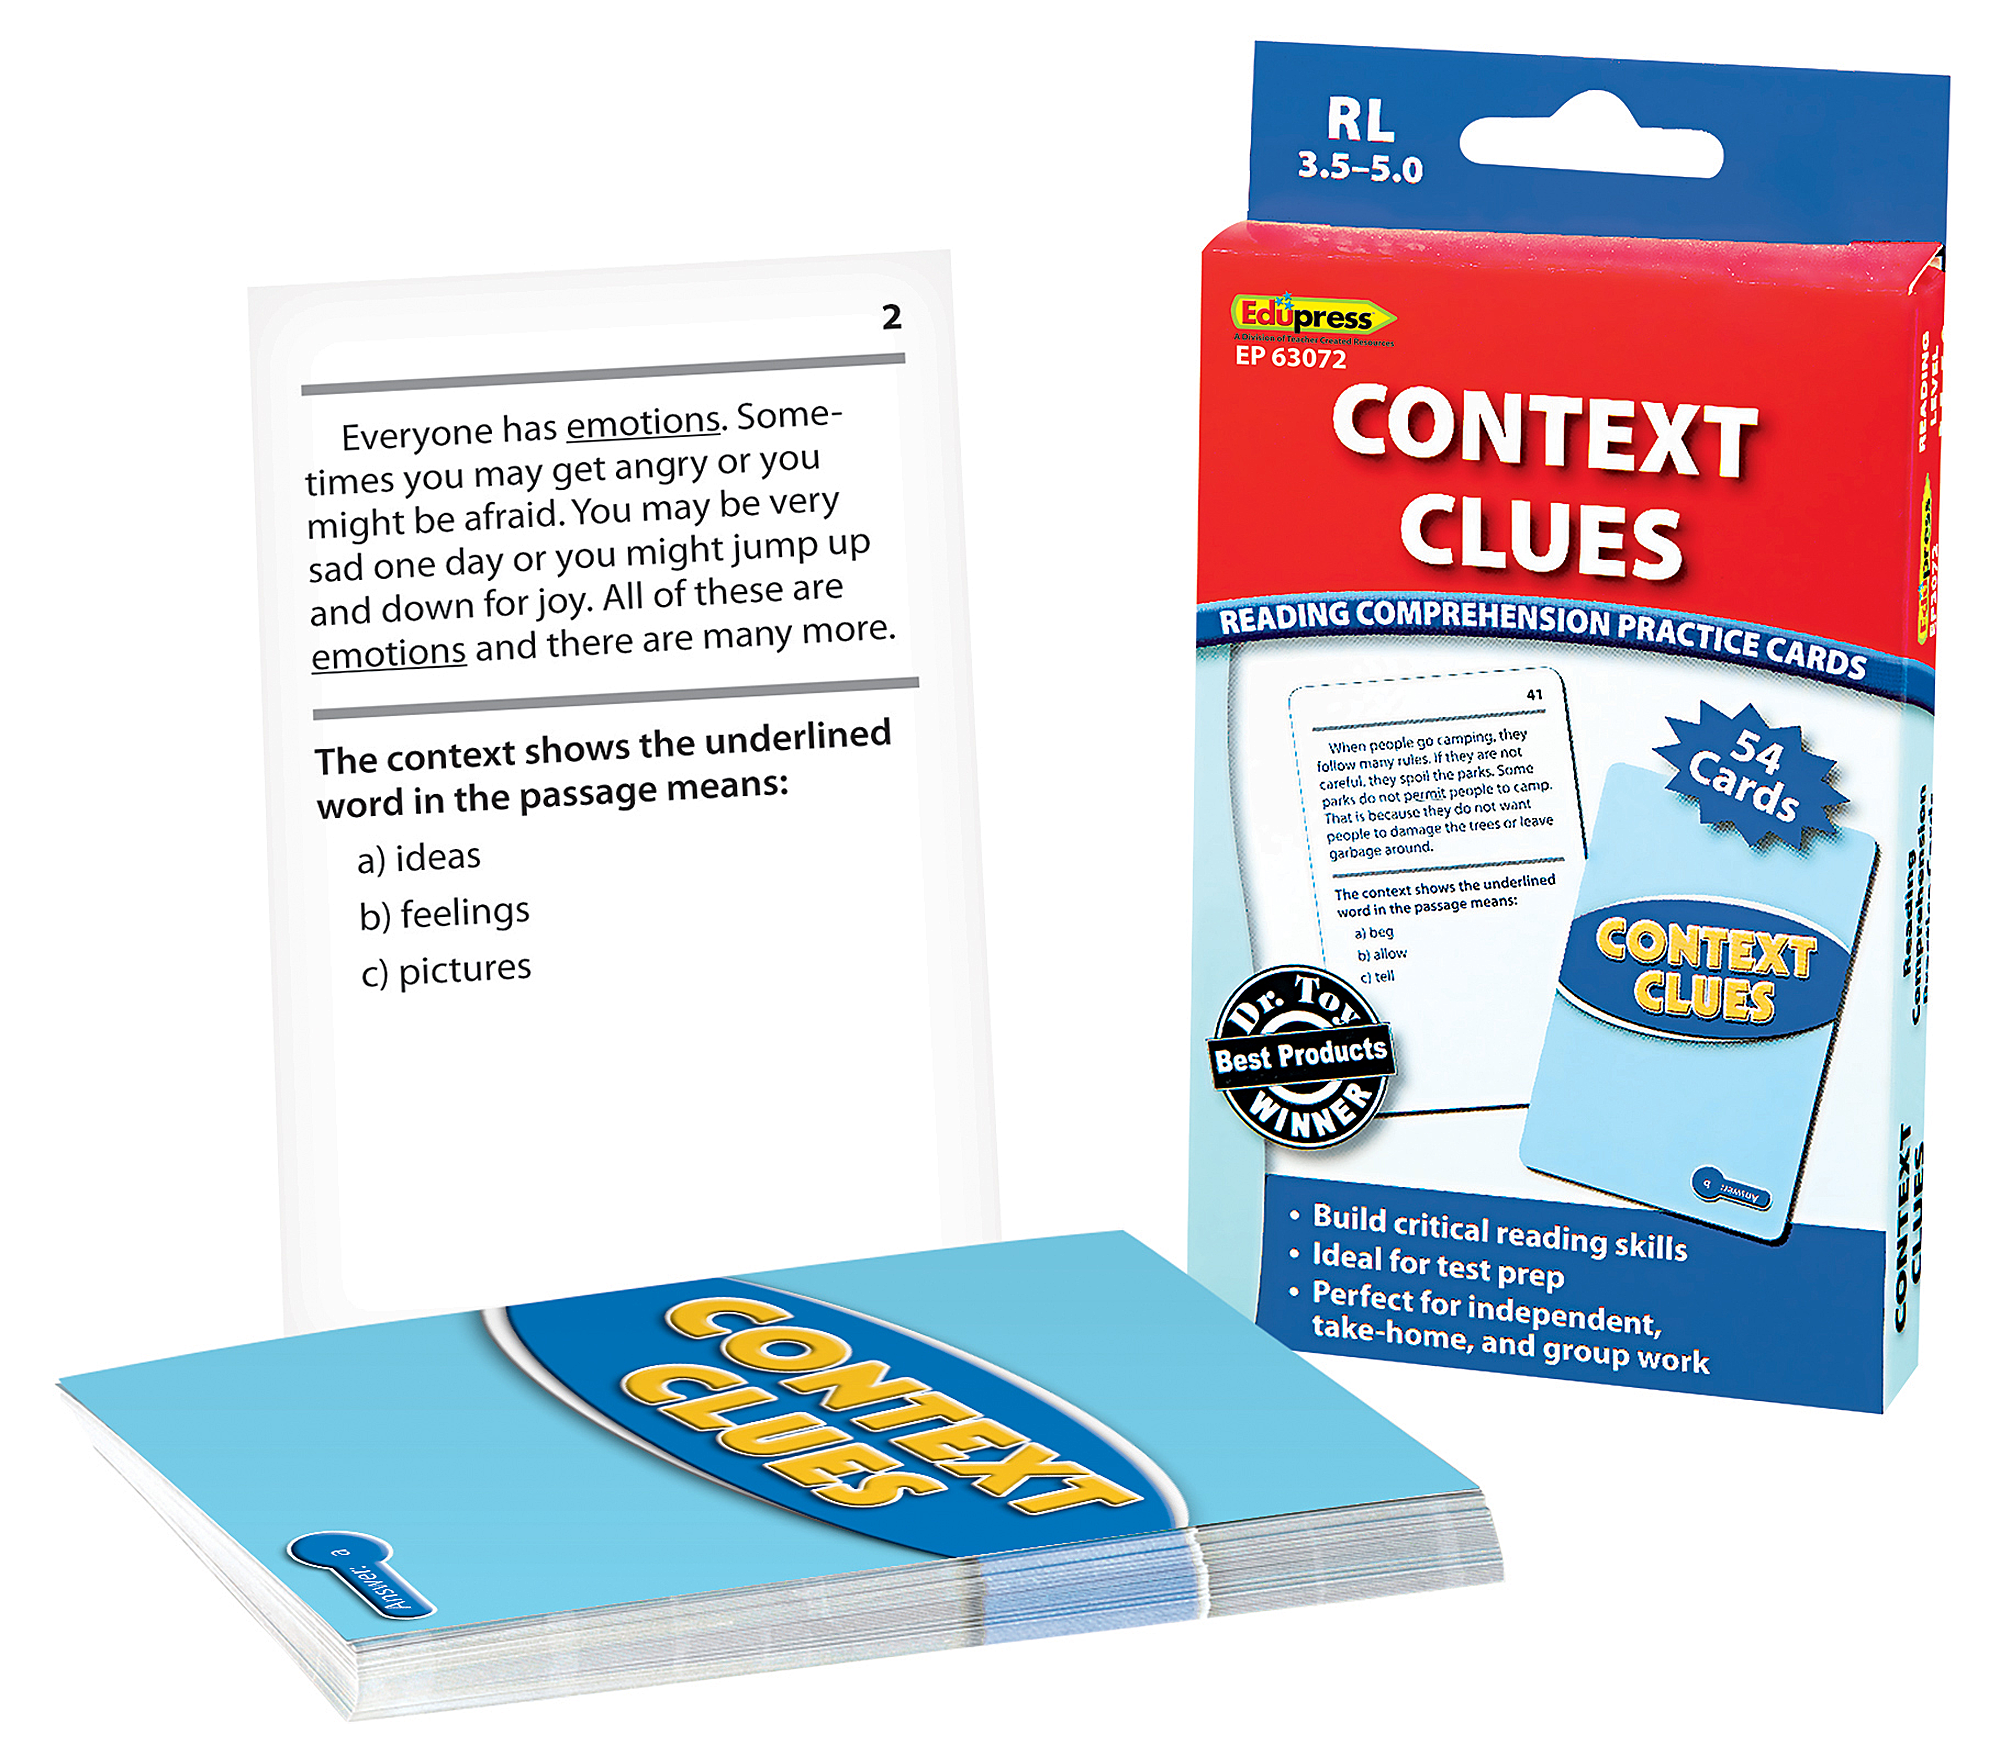 Reading Comprehension Practice Cards: Context Clues (Blue Level)